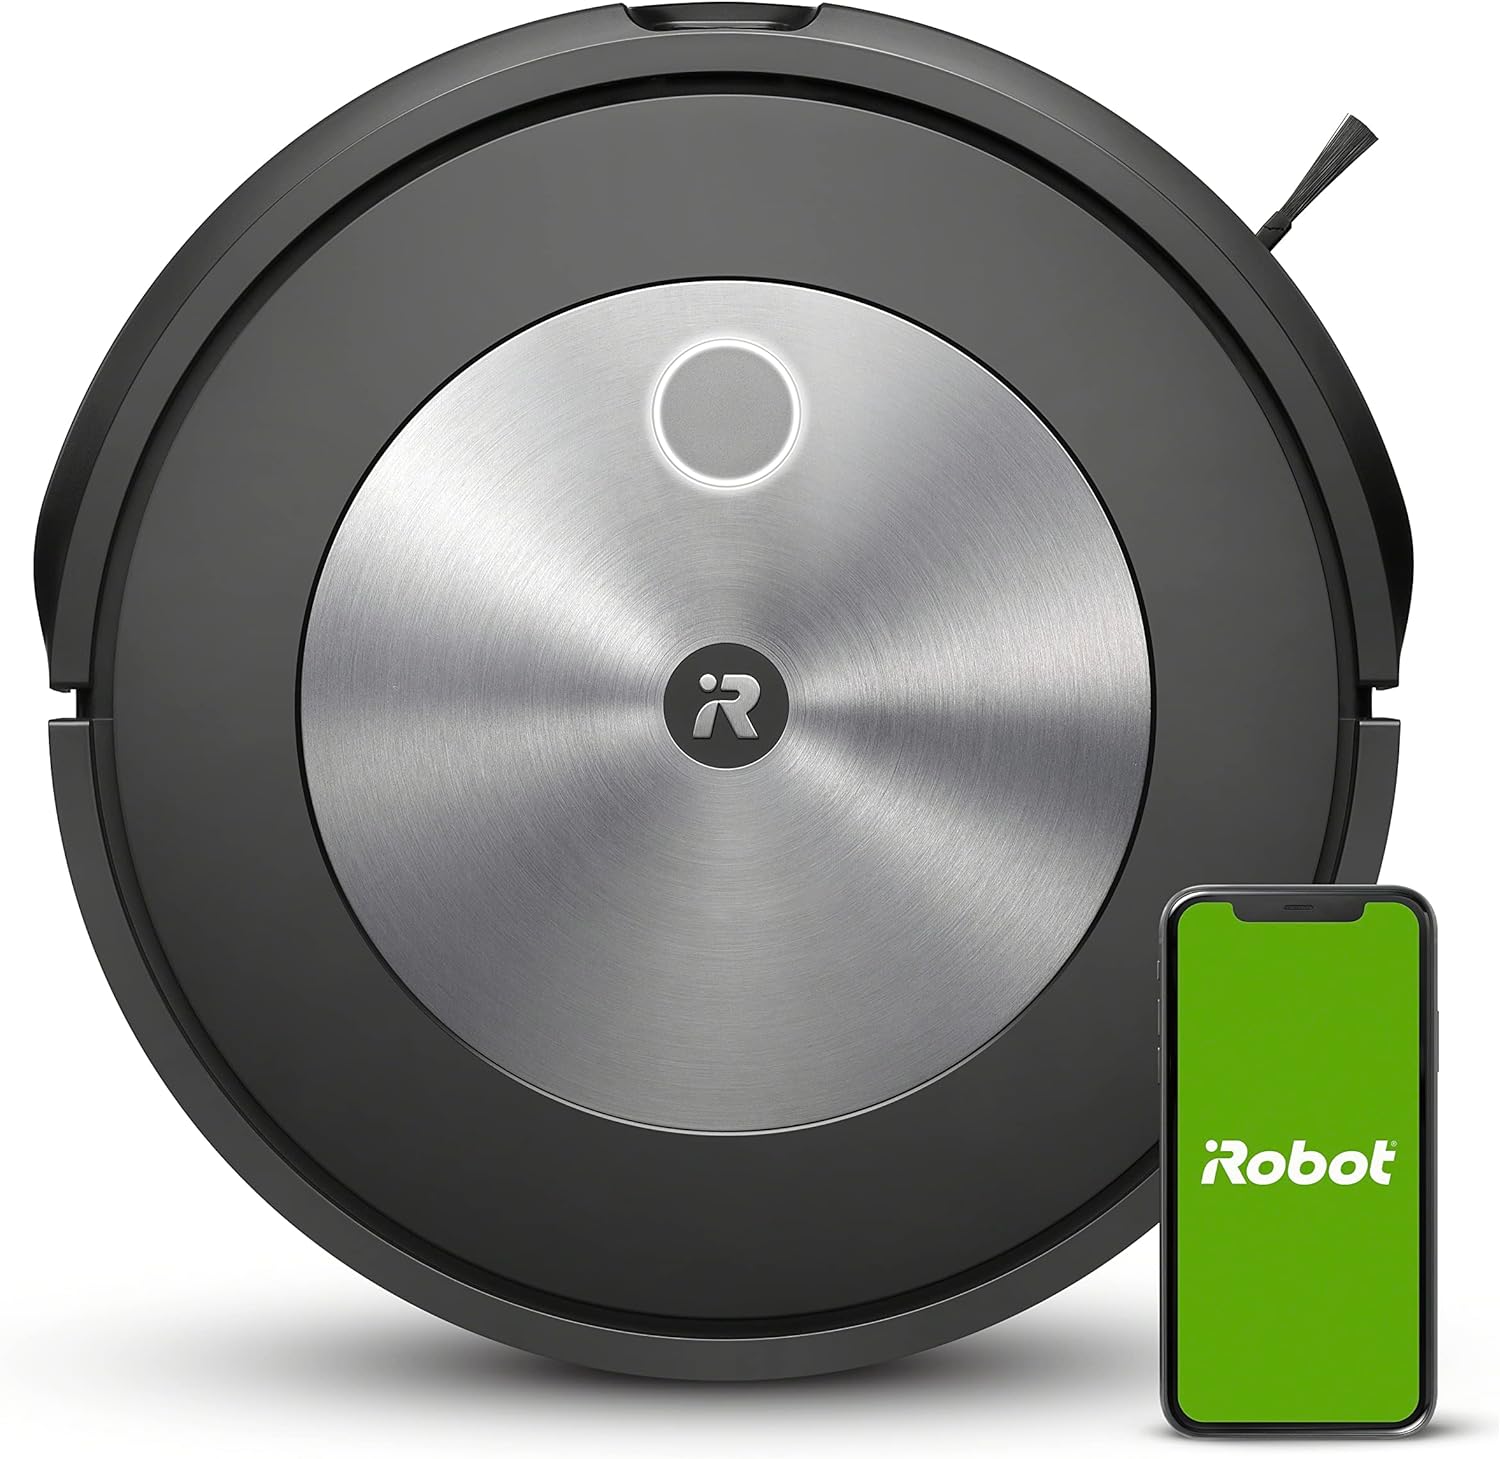 iRobot Roomba j7 Wi-Fi Connected Robot Vacuum (7150) $300 + Free Shipping